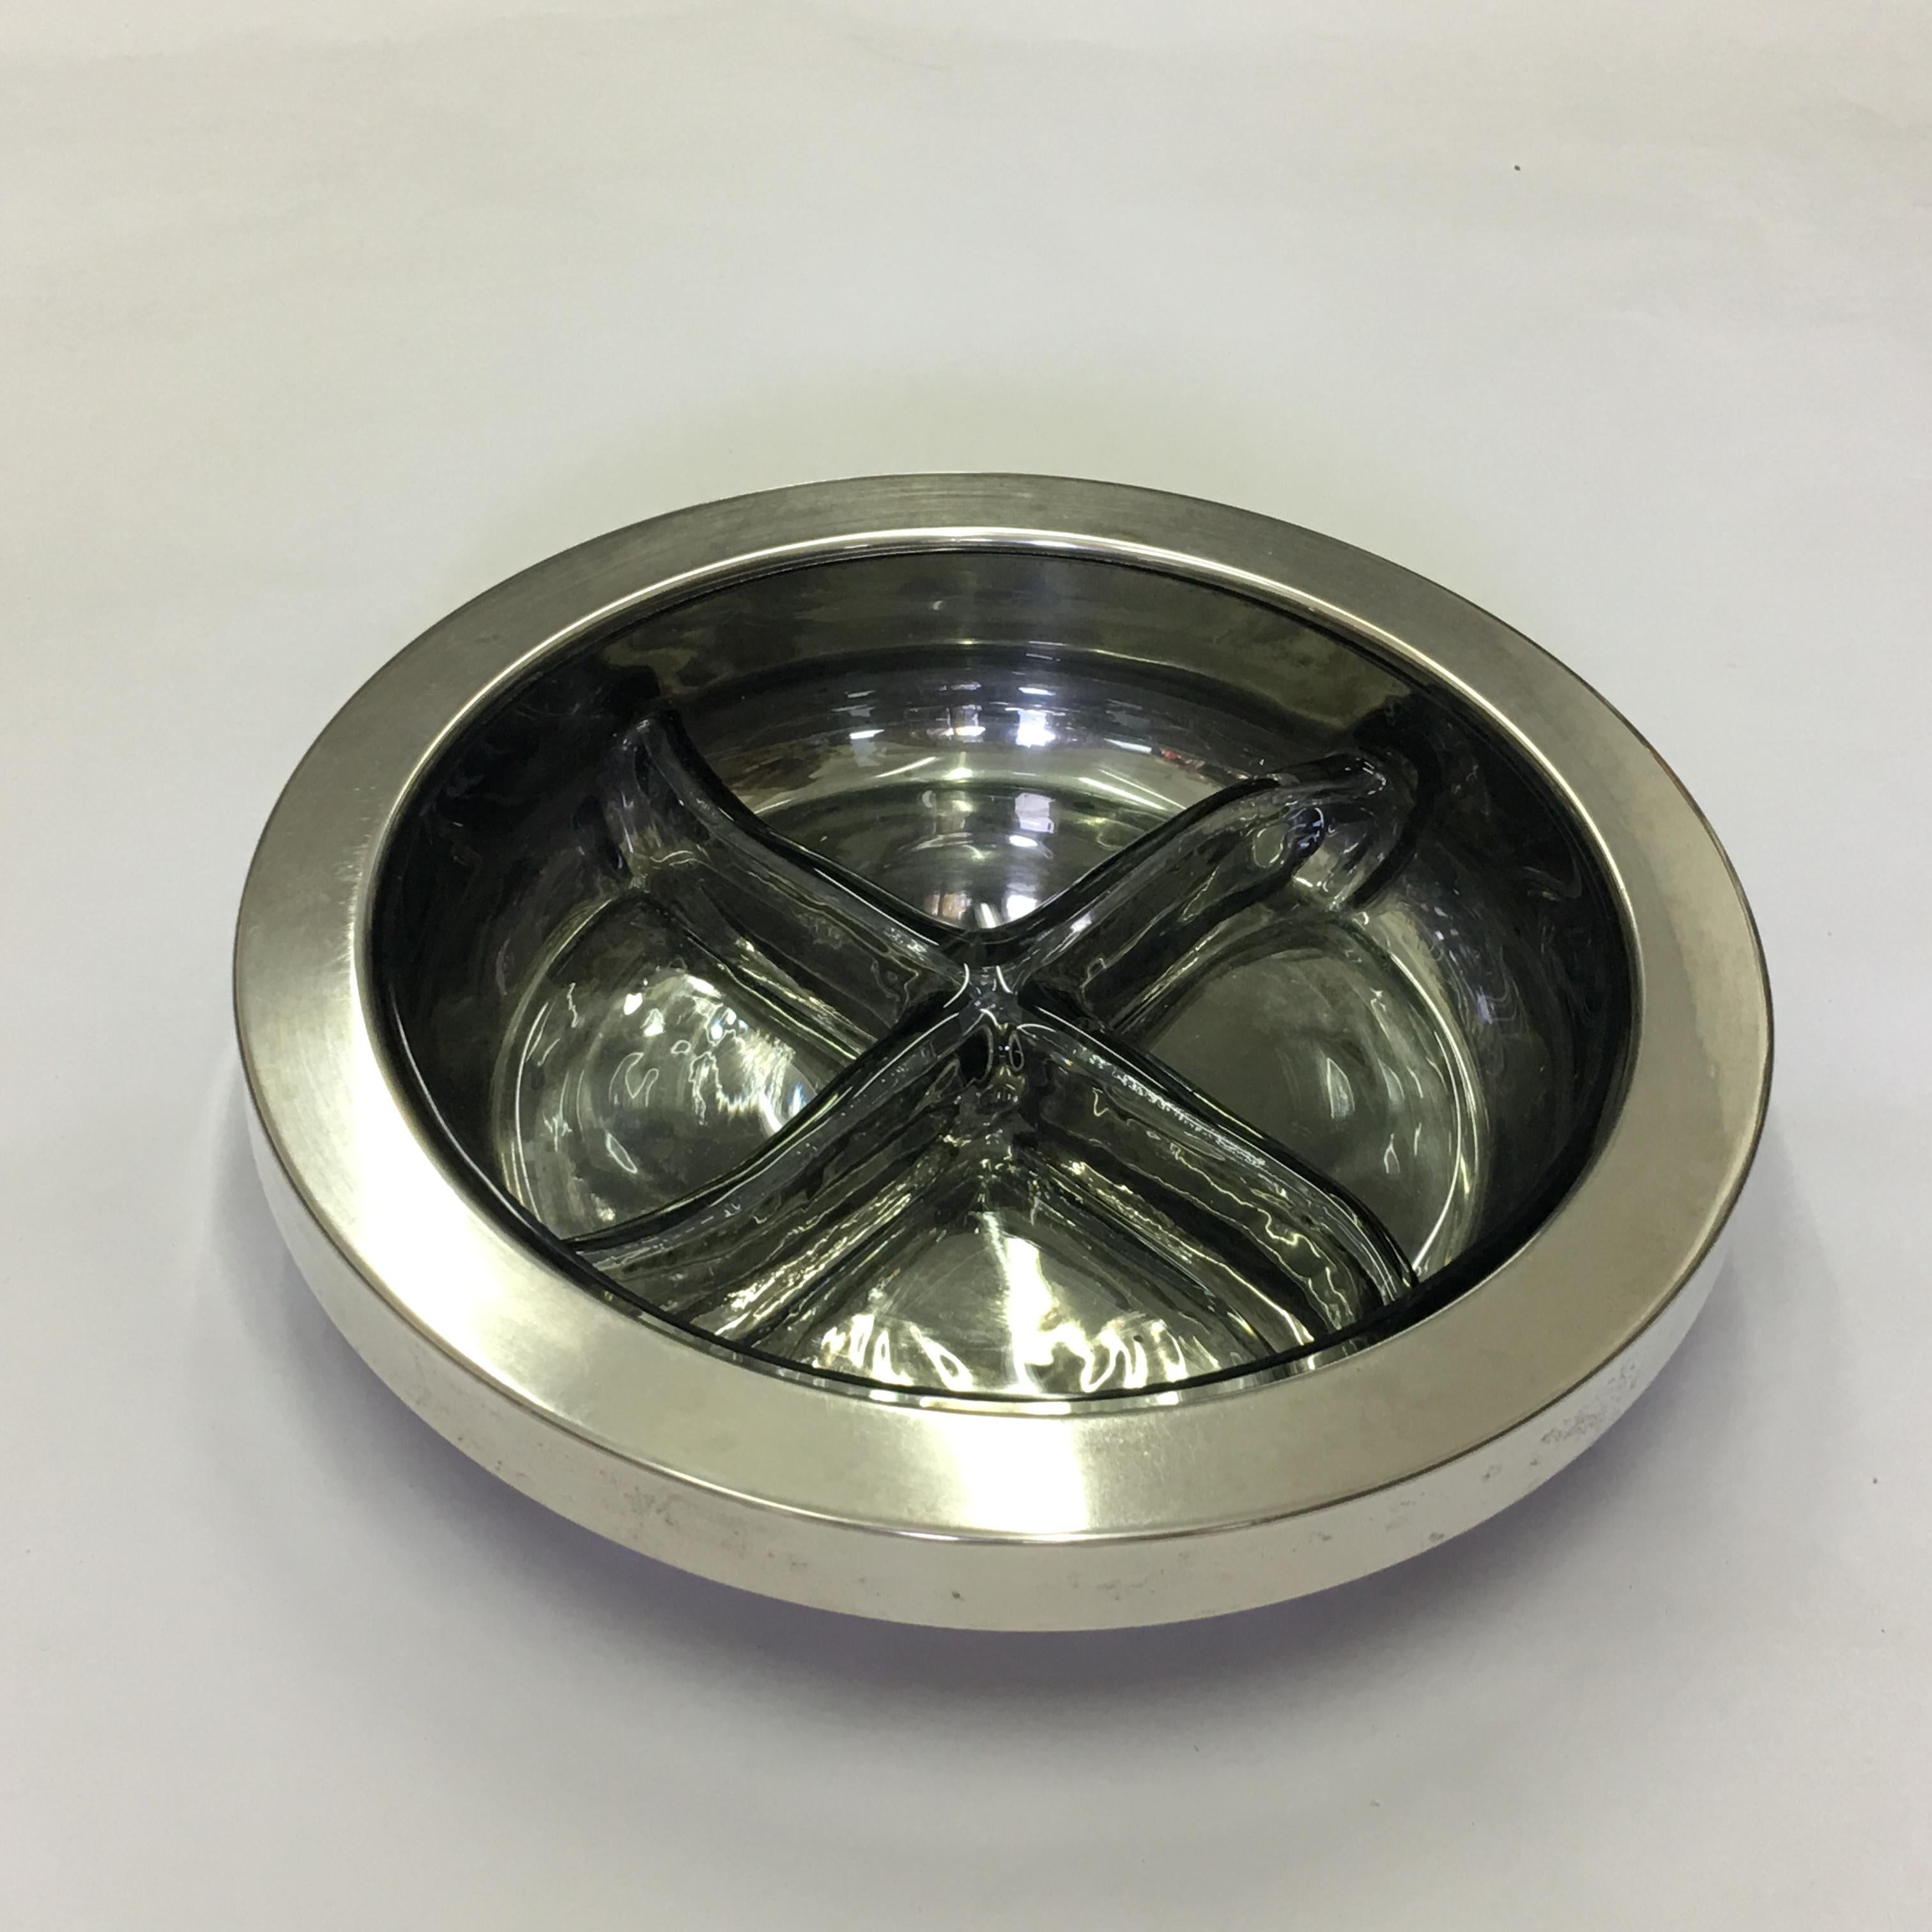 Modernist Italian Silver Plated Centerpiece Designed by Enrico Baldaro, 1970 For Sale 7